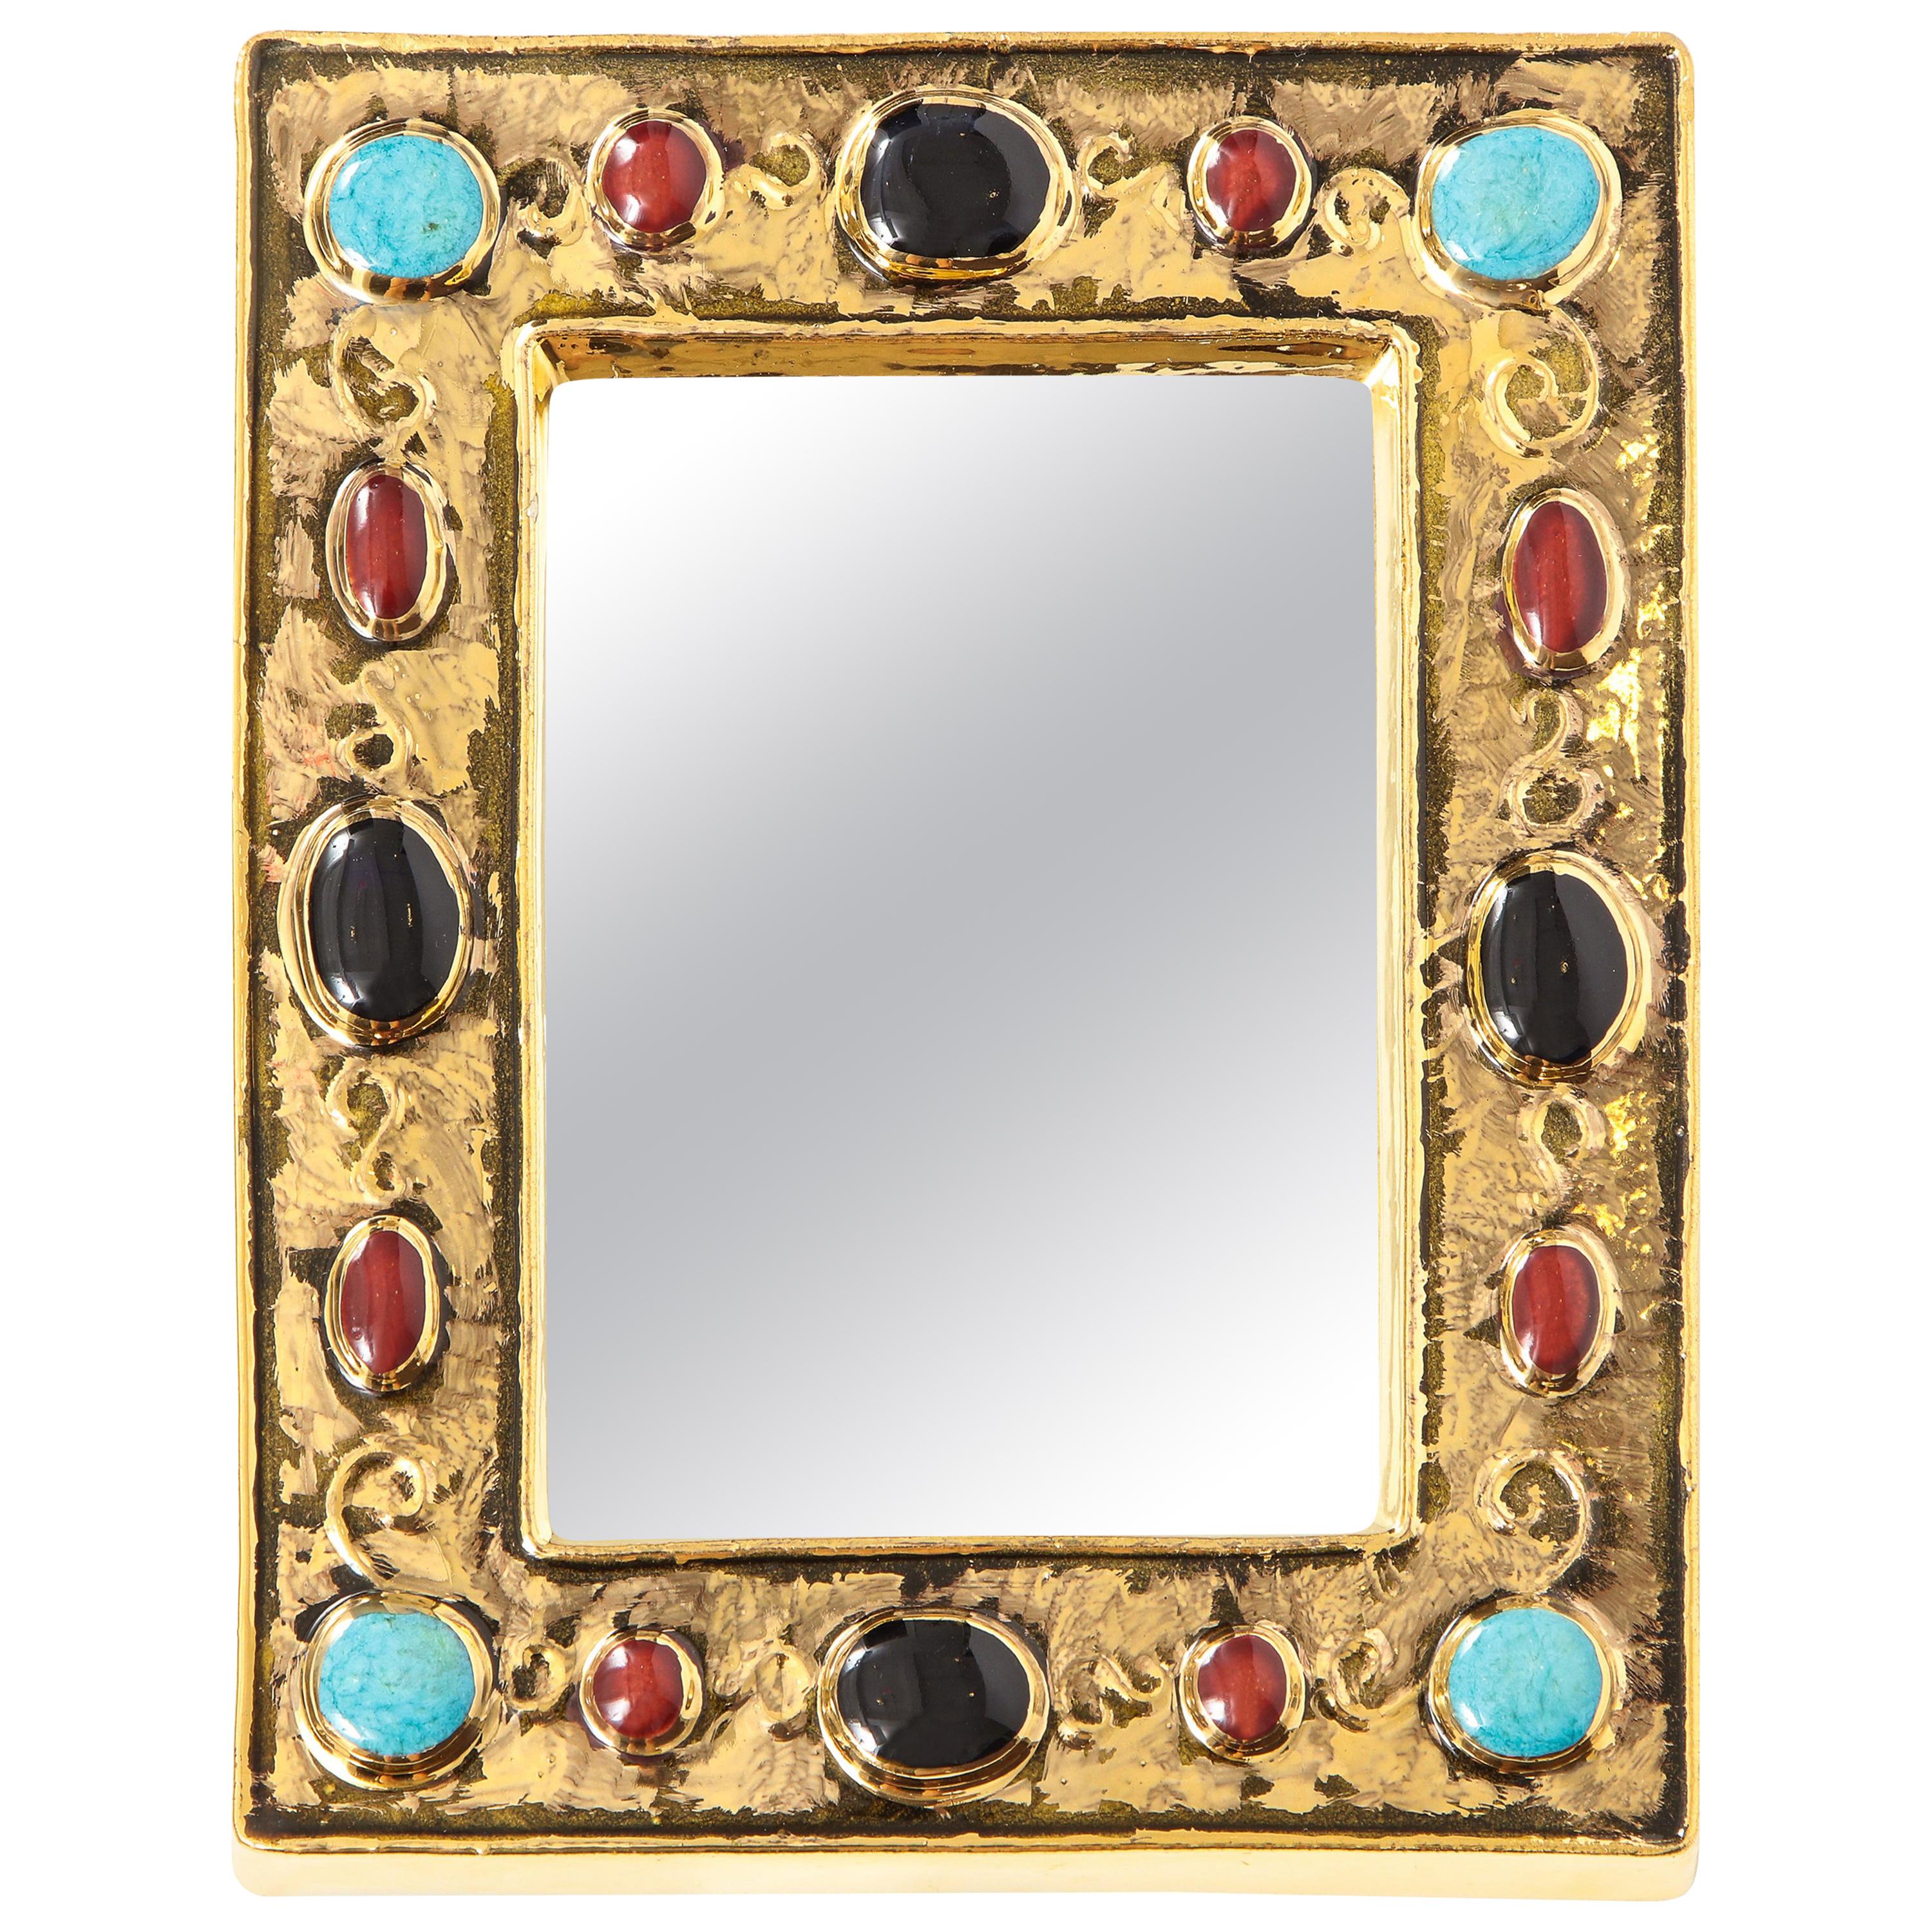 Francois Lembo Mirror, Ceramic, Gold, Turquoise, Black and Red, Jeweled, Signed